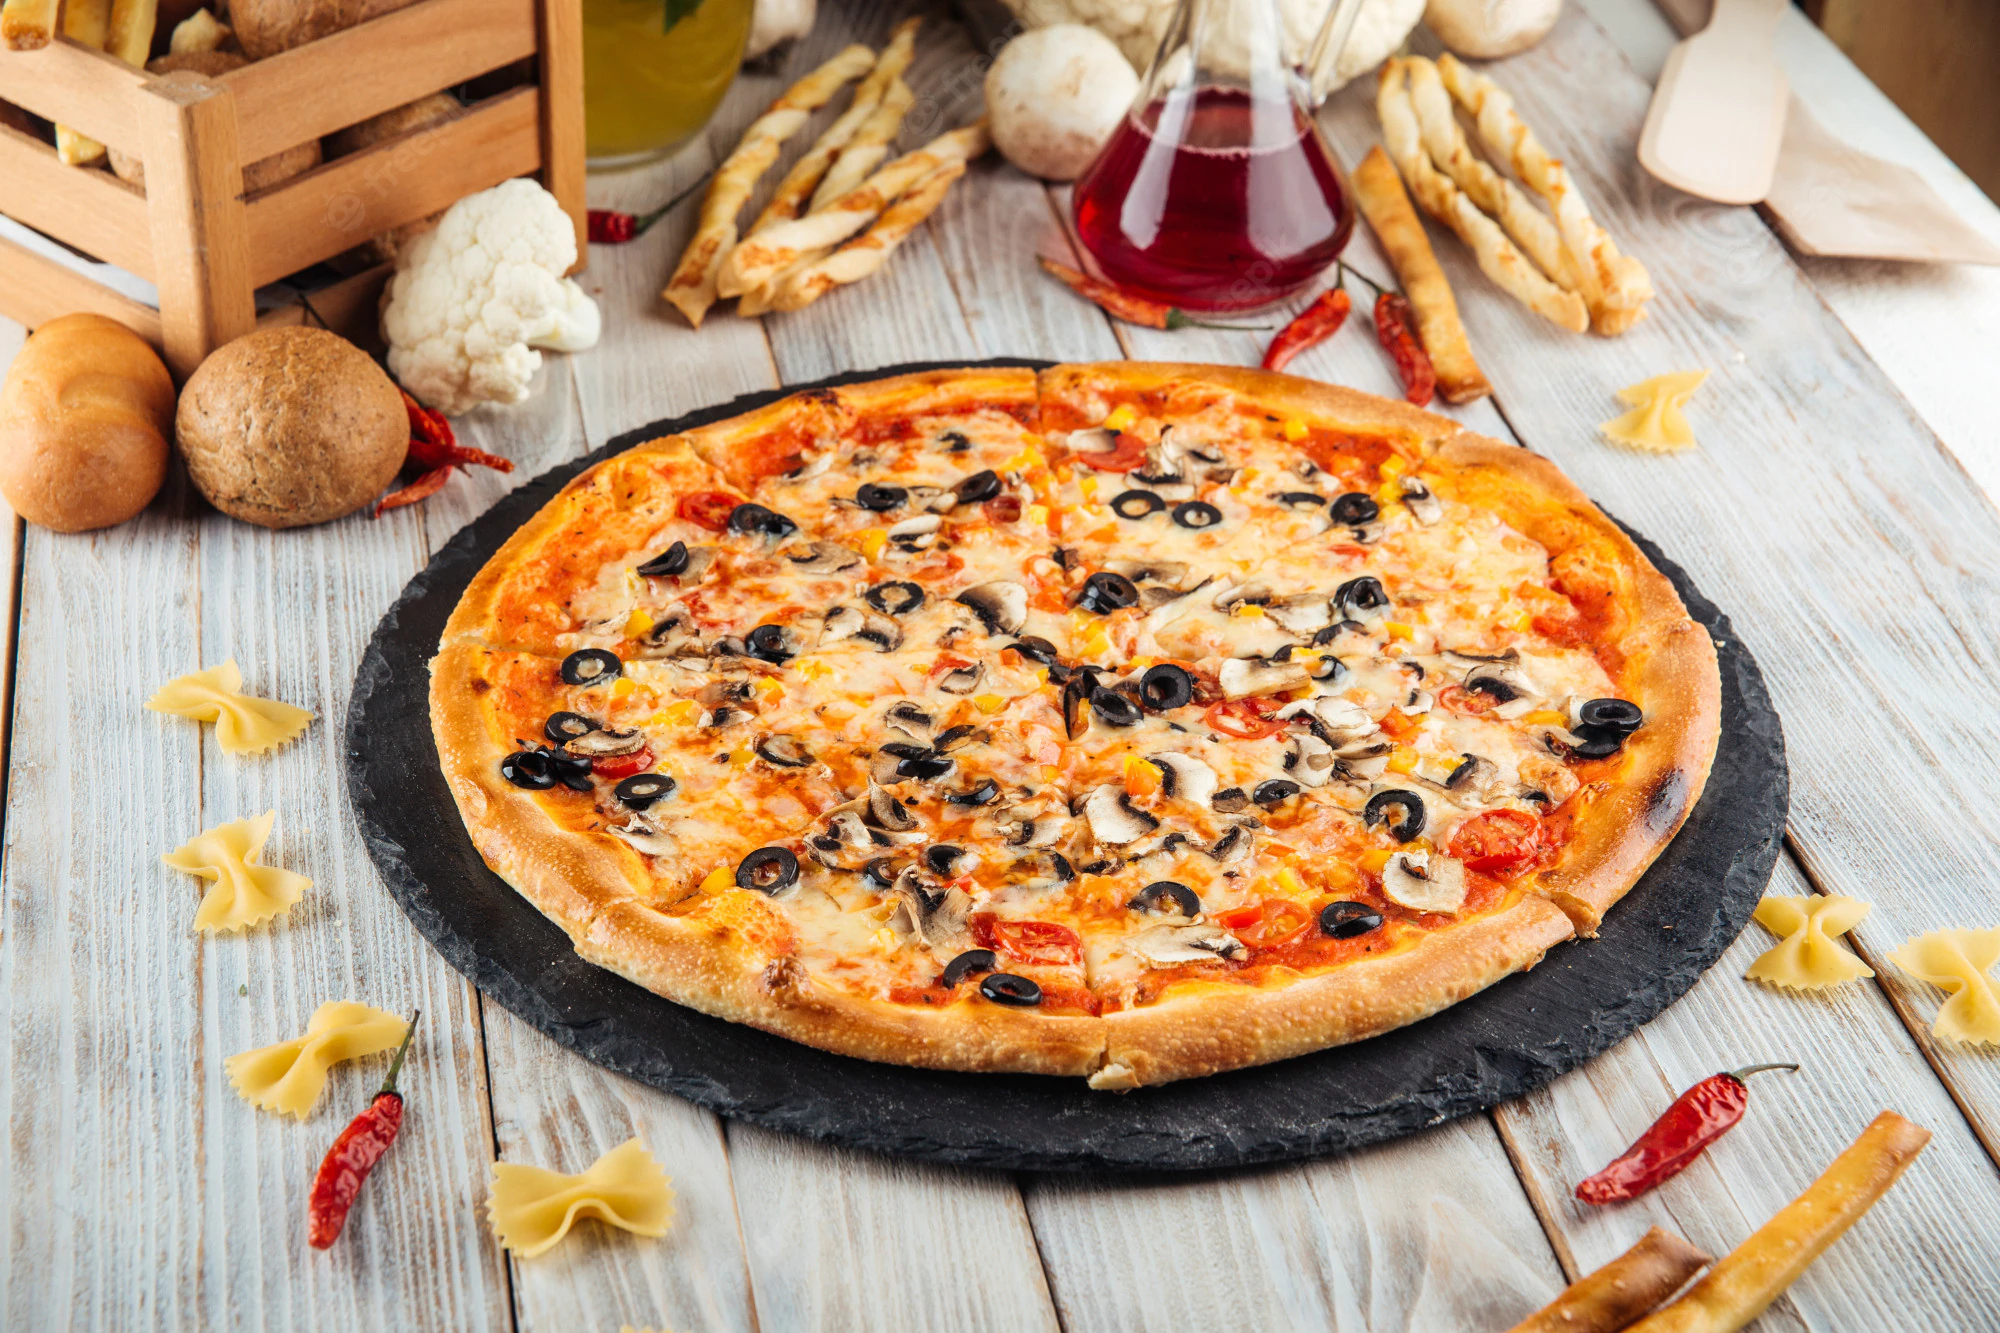 four season pizza with olives mushrooms and tomato 219193 1694